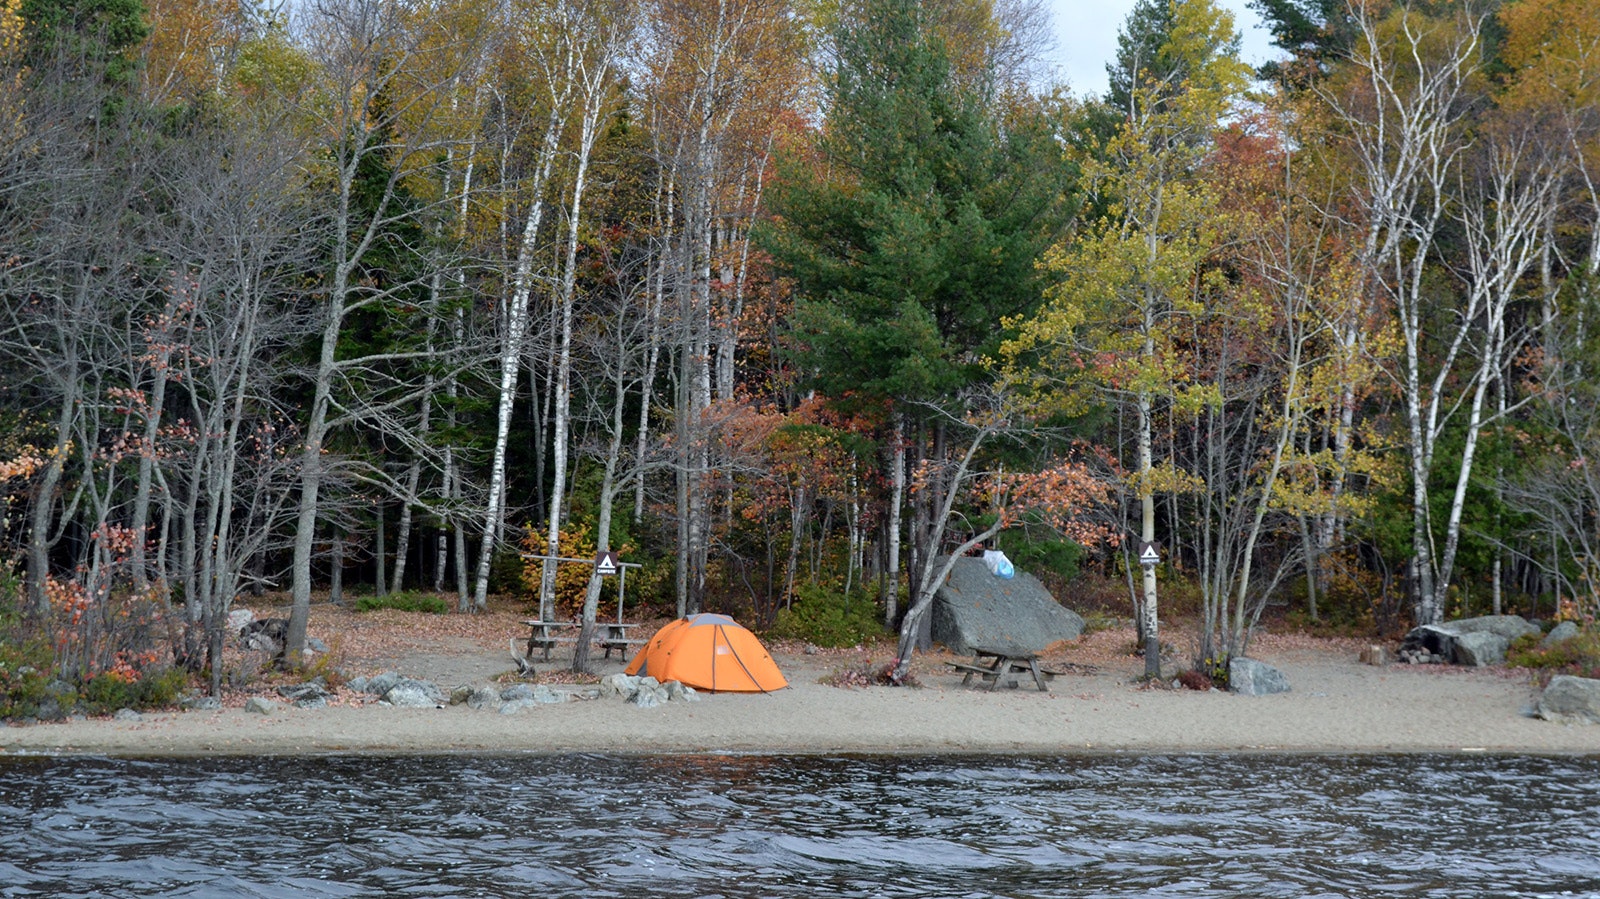 Camping on public land is just as popular in Maine as it is in Wyoming. People abandoning property in the woods, or squatting on sites, isn’t yet as big of a problem there as it is in parts of Wyoming, but Maine officials worry that it could become one.